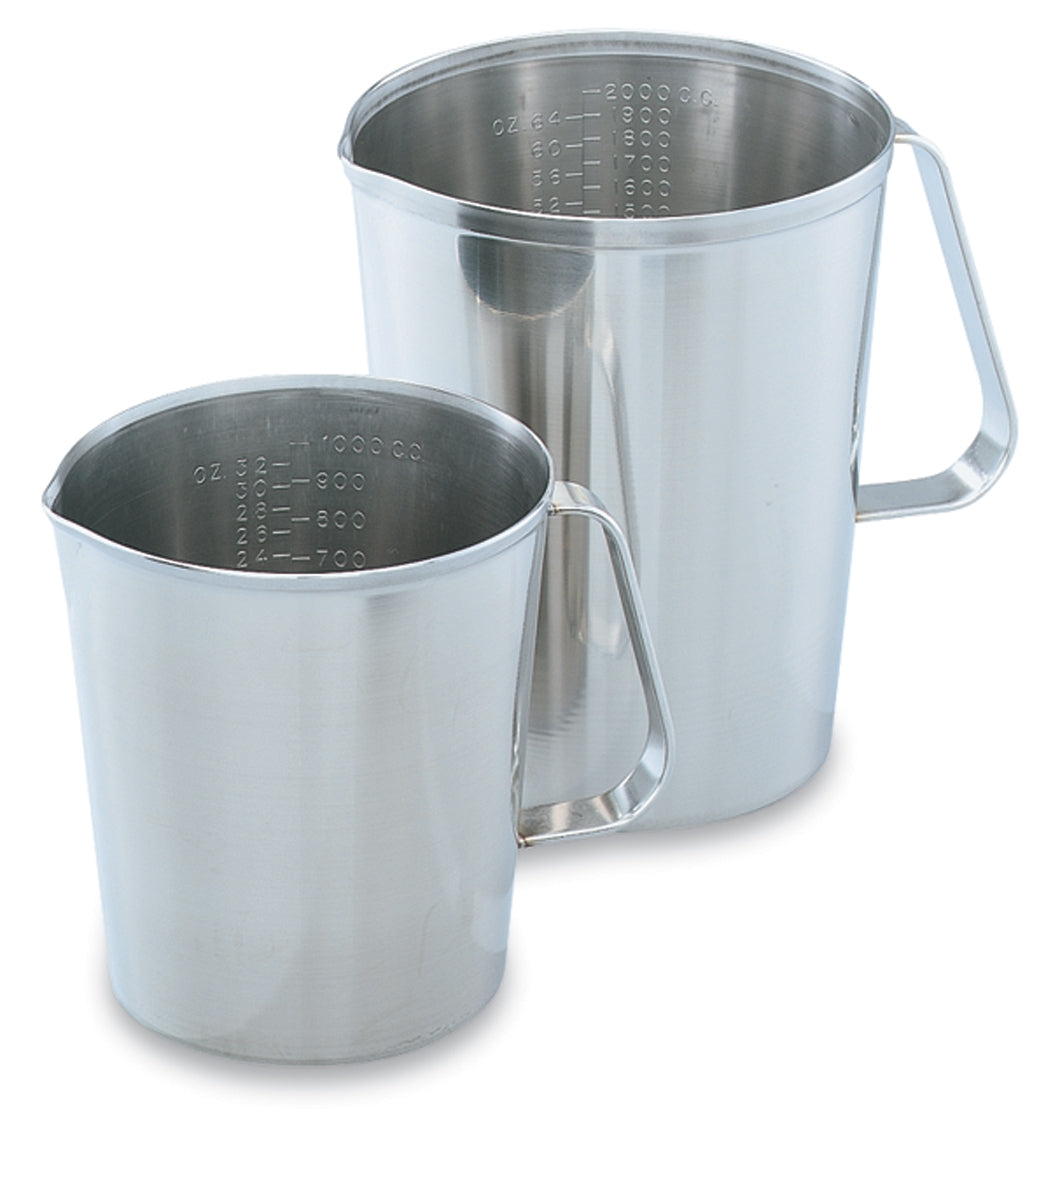 ½-quart stainless steel graduated measuring cup